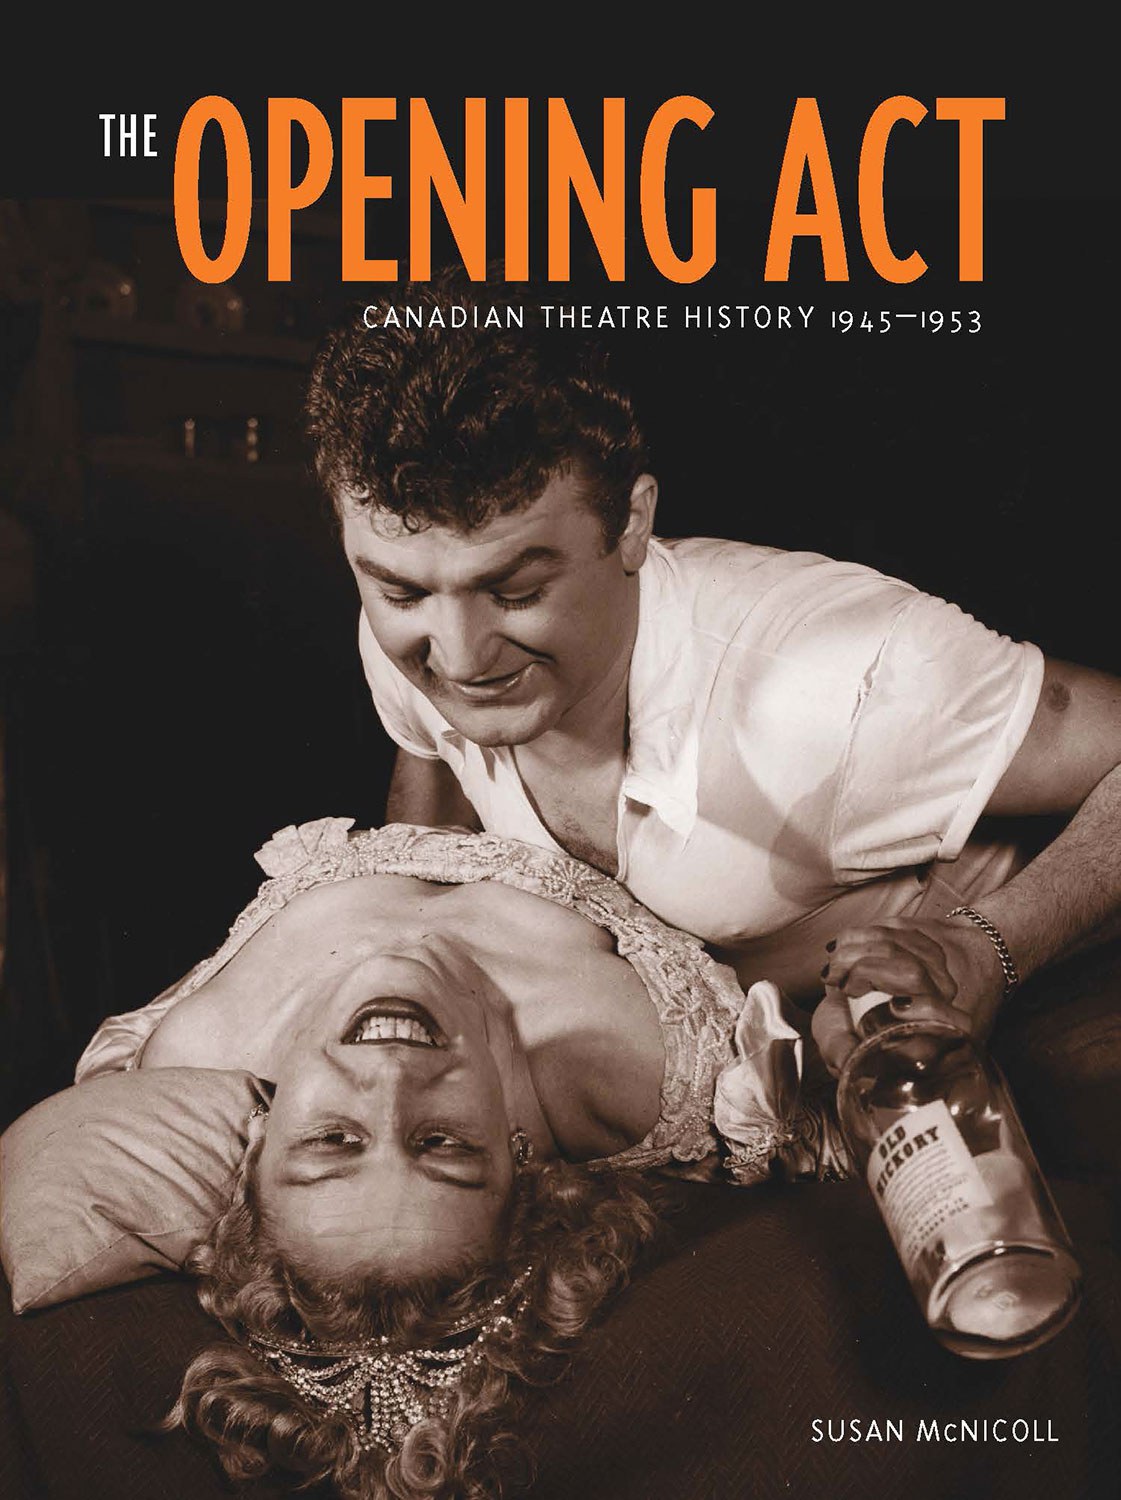 The Opening Act: Canadian Theatre History 1945-1953, by Susan McNicoll. Ronsdale Press, 2012.